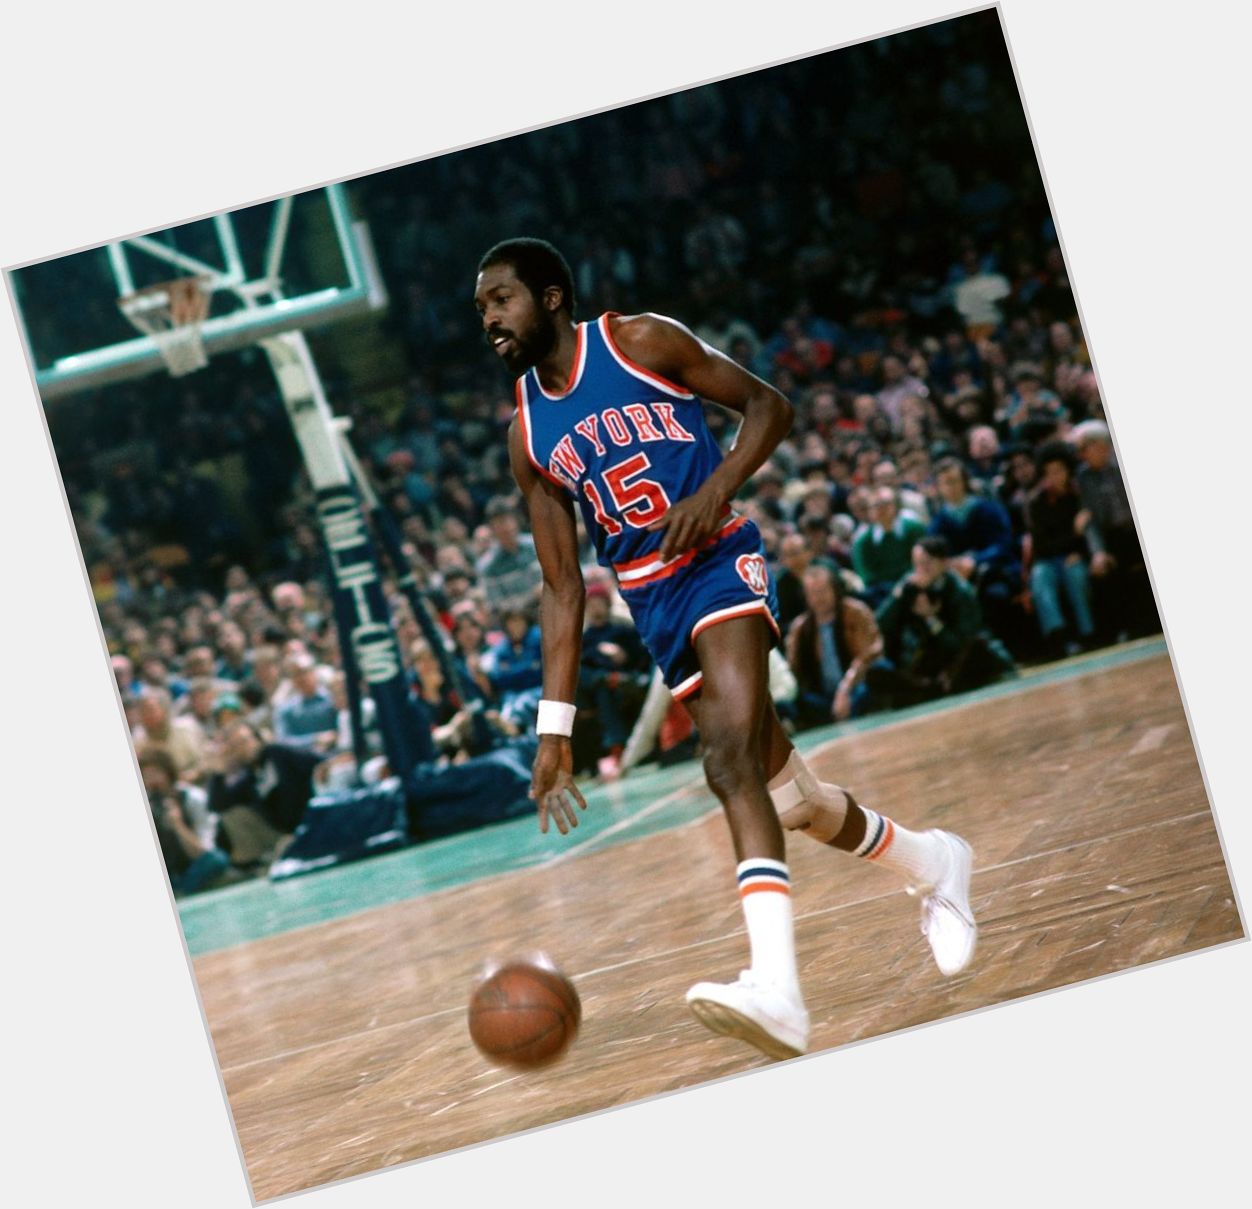 Happy 70th birthday to one of the greatest players of all time, Earl Monroe aka 